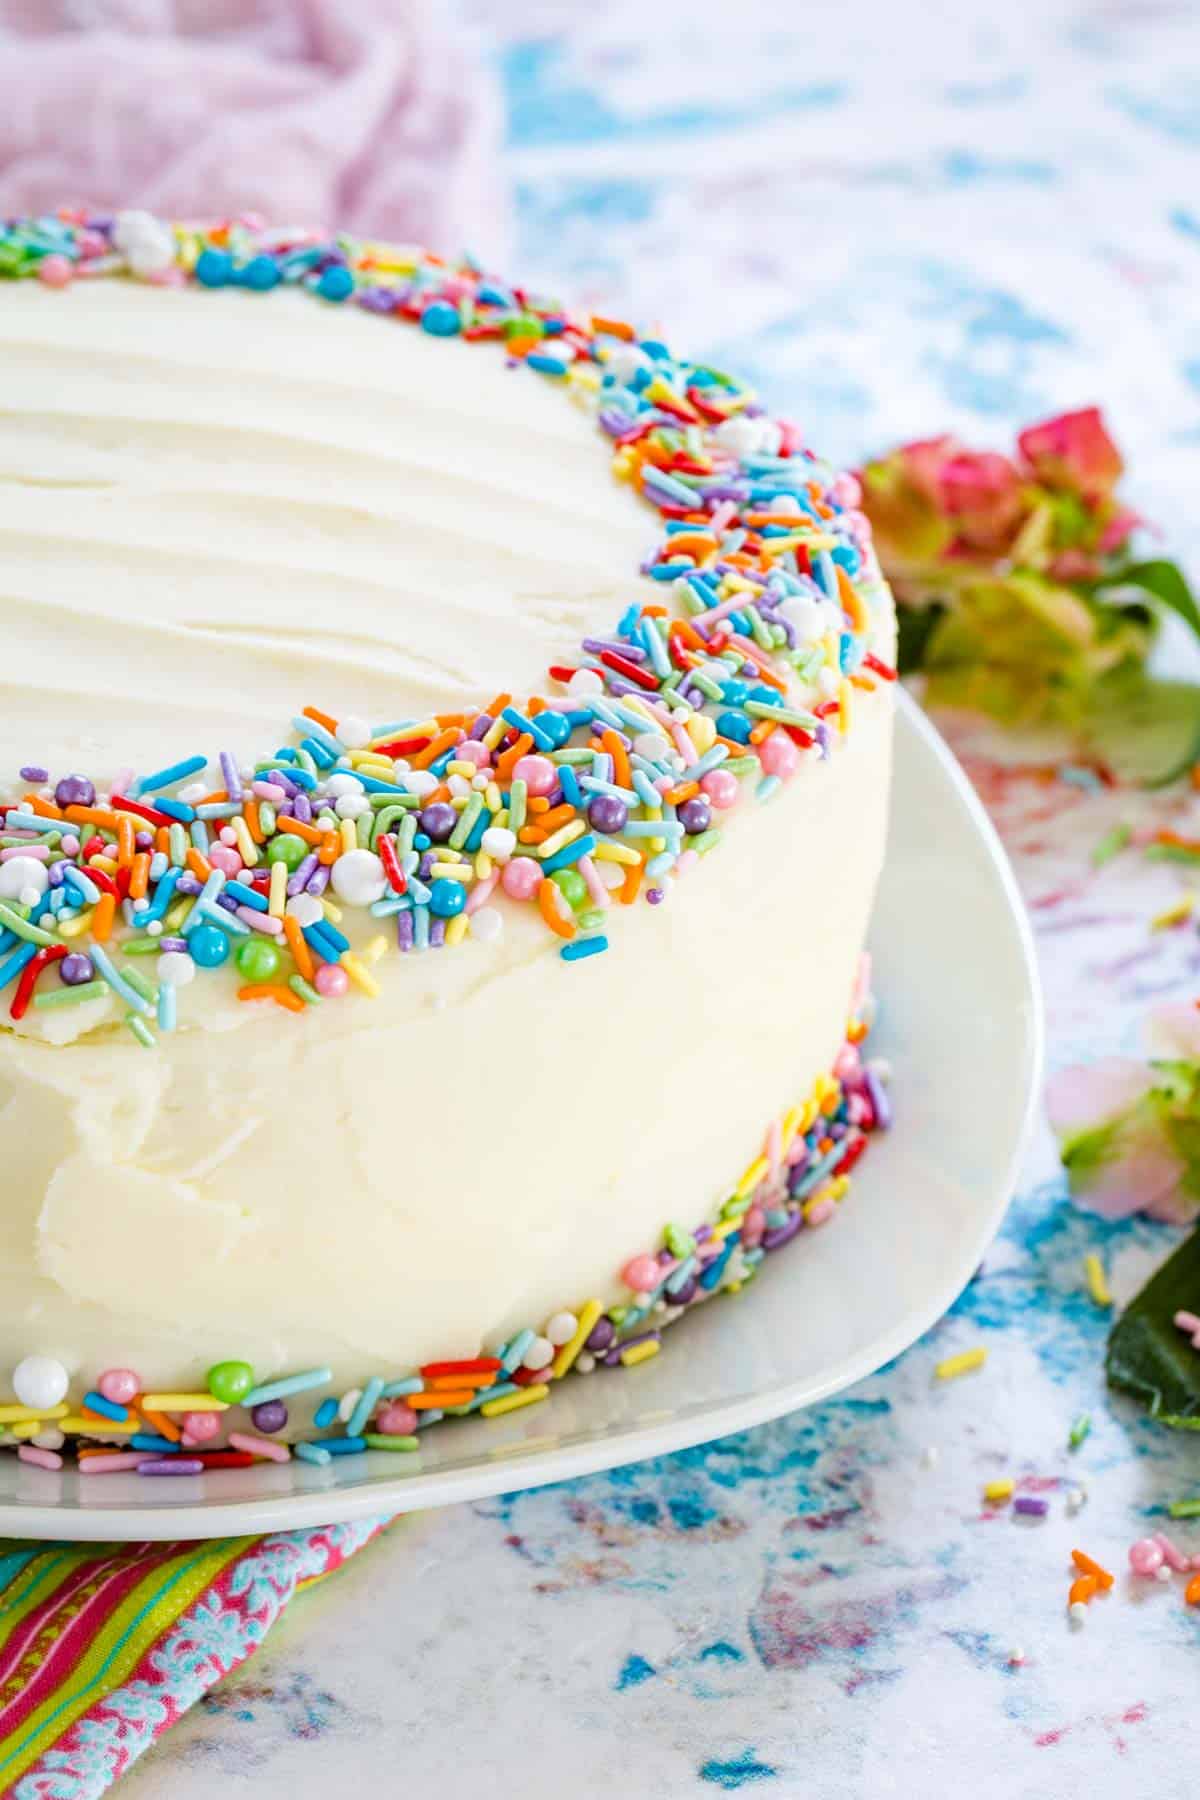 A frosted funfetti cake on a plate.